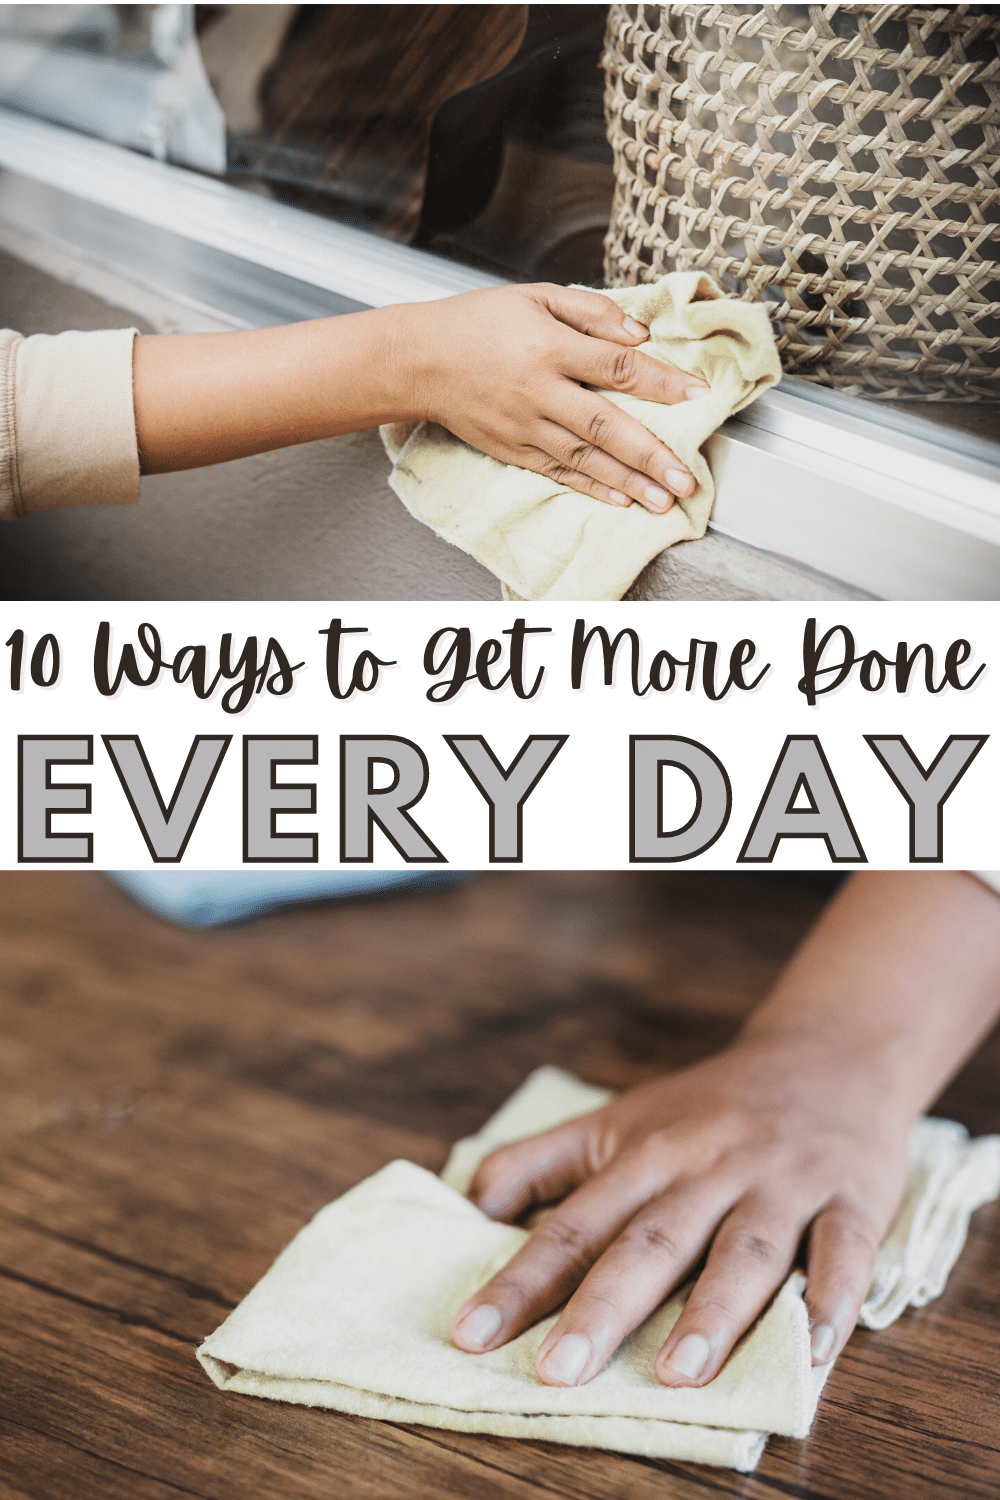 Busy moms have a lot to do and never enough time to do it all. Here are 10 easy ways to get more done every day that you can start using right now. #busymoms #getmoredone #productiveday #productivemorning via @wondermomwannab